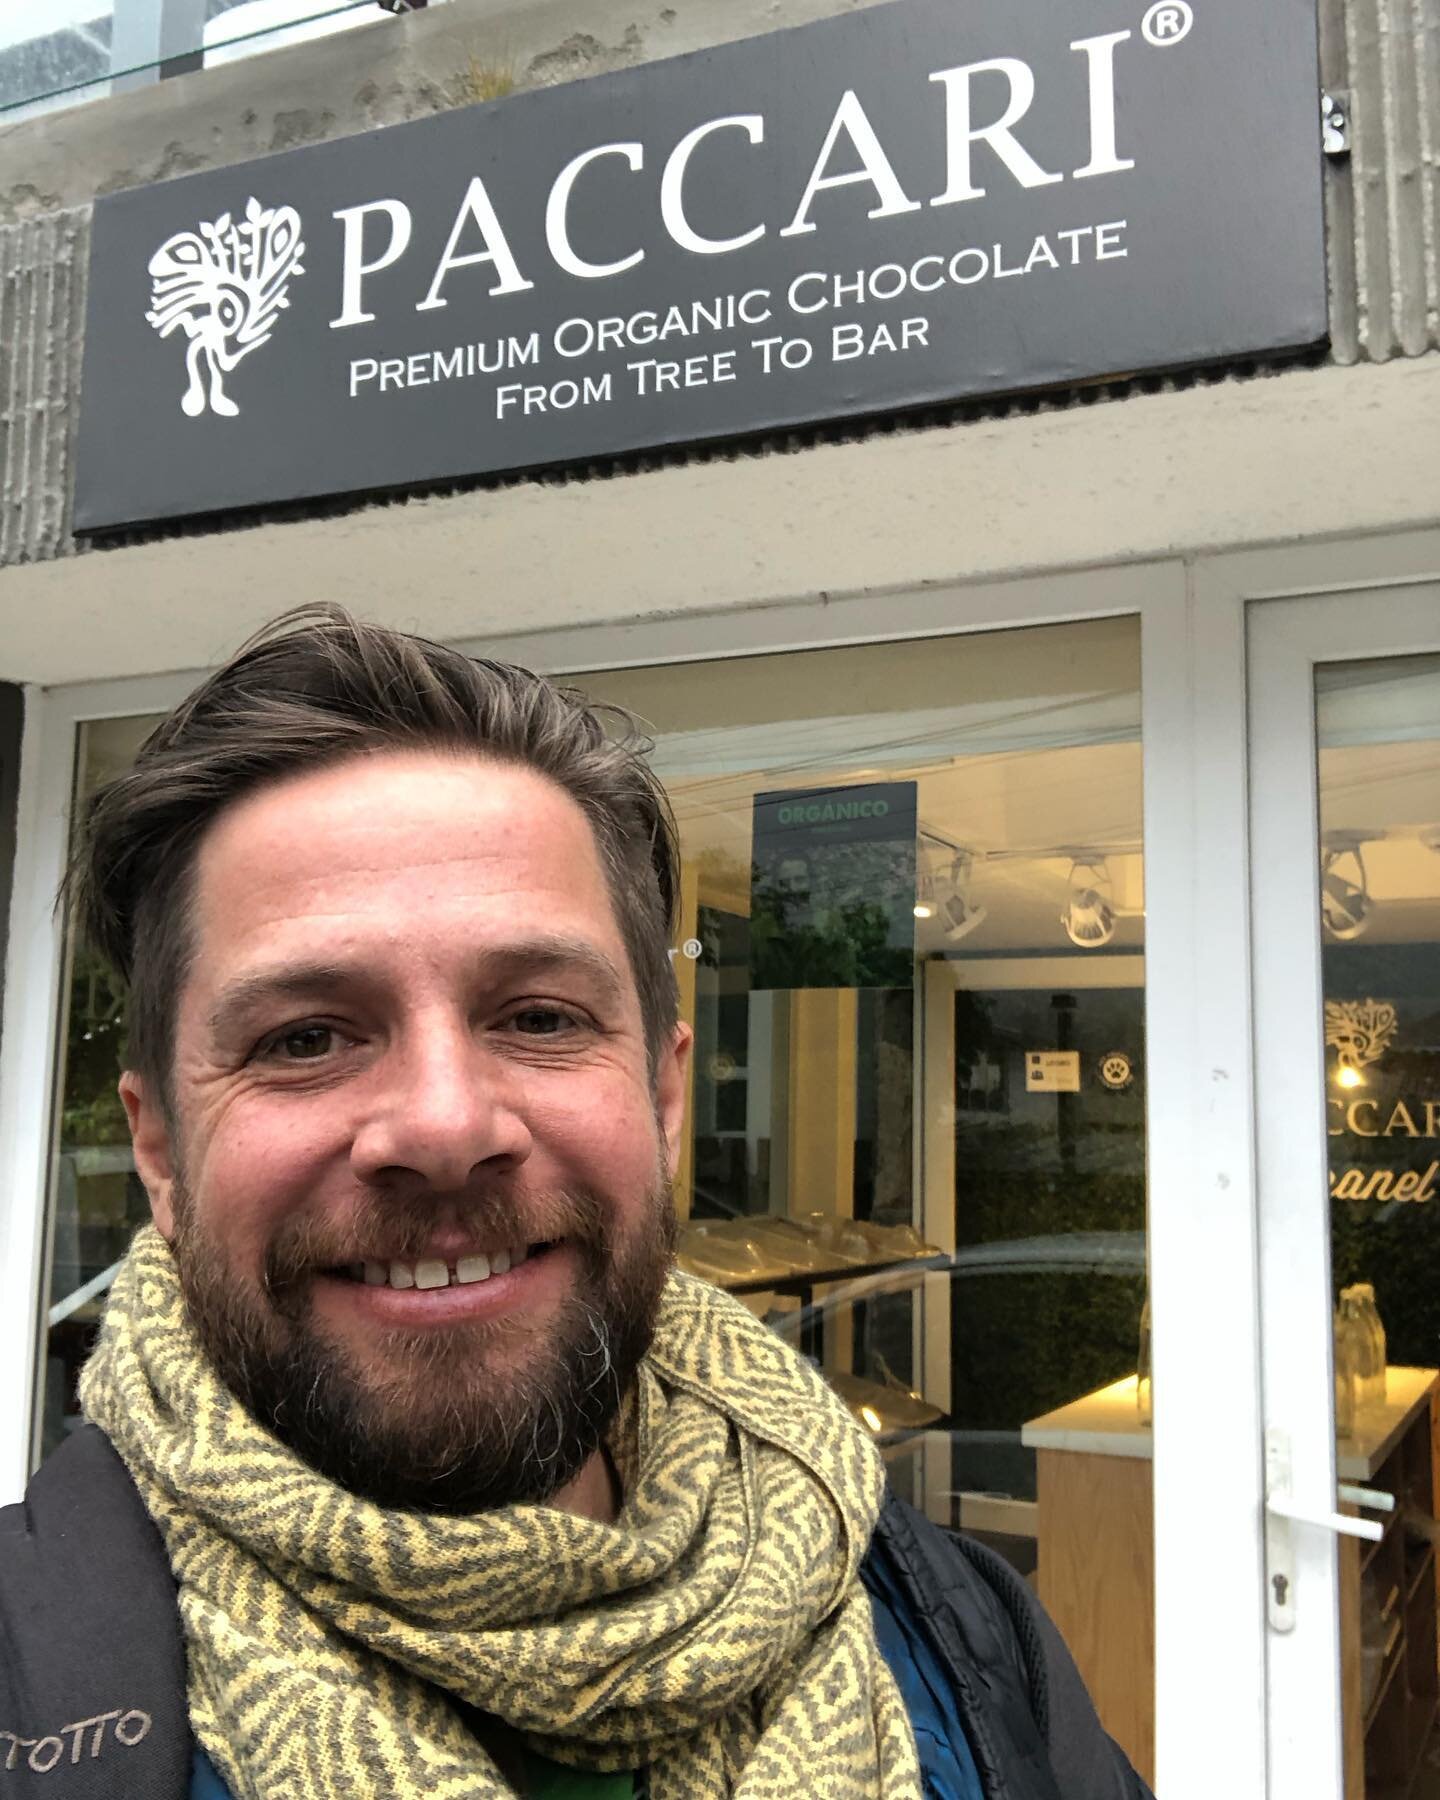 Visiting the big boys today, first Pacari to see what this long lost of medals is about, and then Republica. 

Big surprise to me, Ecuadorian soups are really the best 

#veganlife #vegan #cacao #cleantreats  #chocolate #coconut #foodnetwork #foodnew